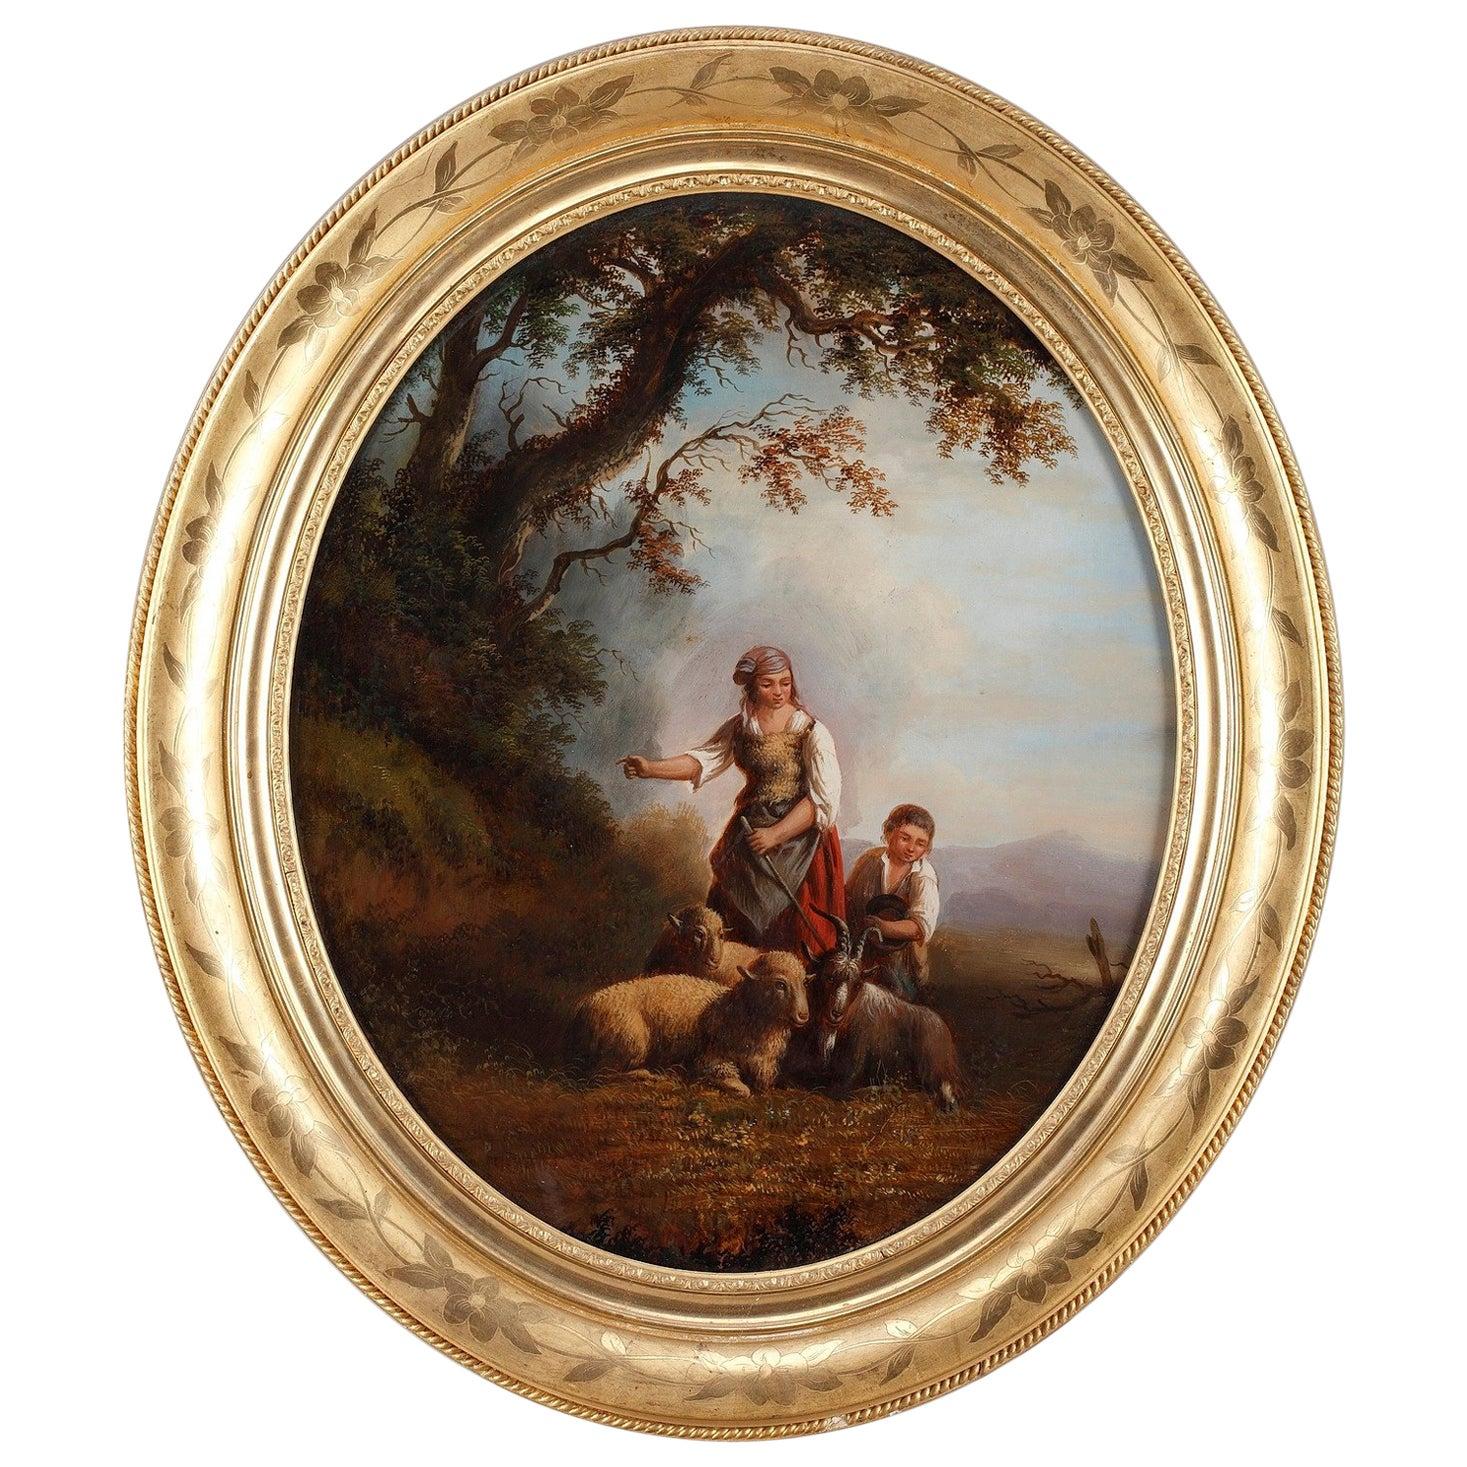 19th Century Reverse Glass Painting with Shepherds Signed Xerey